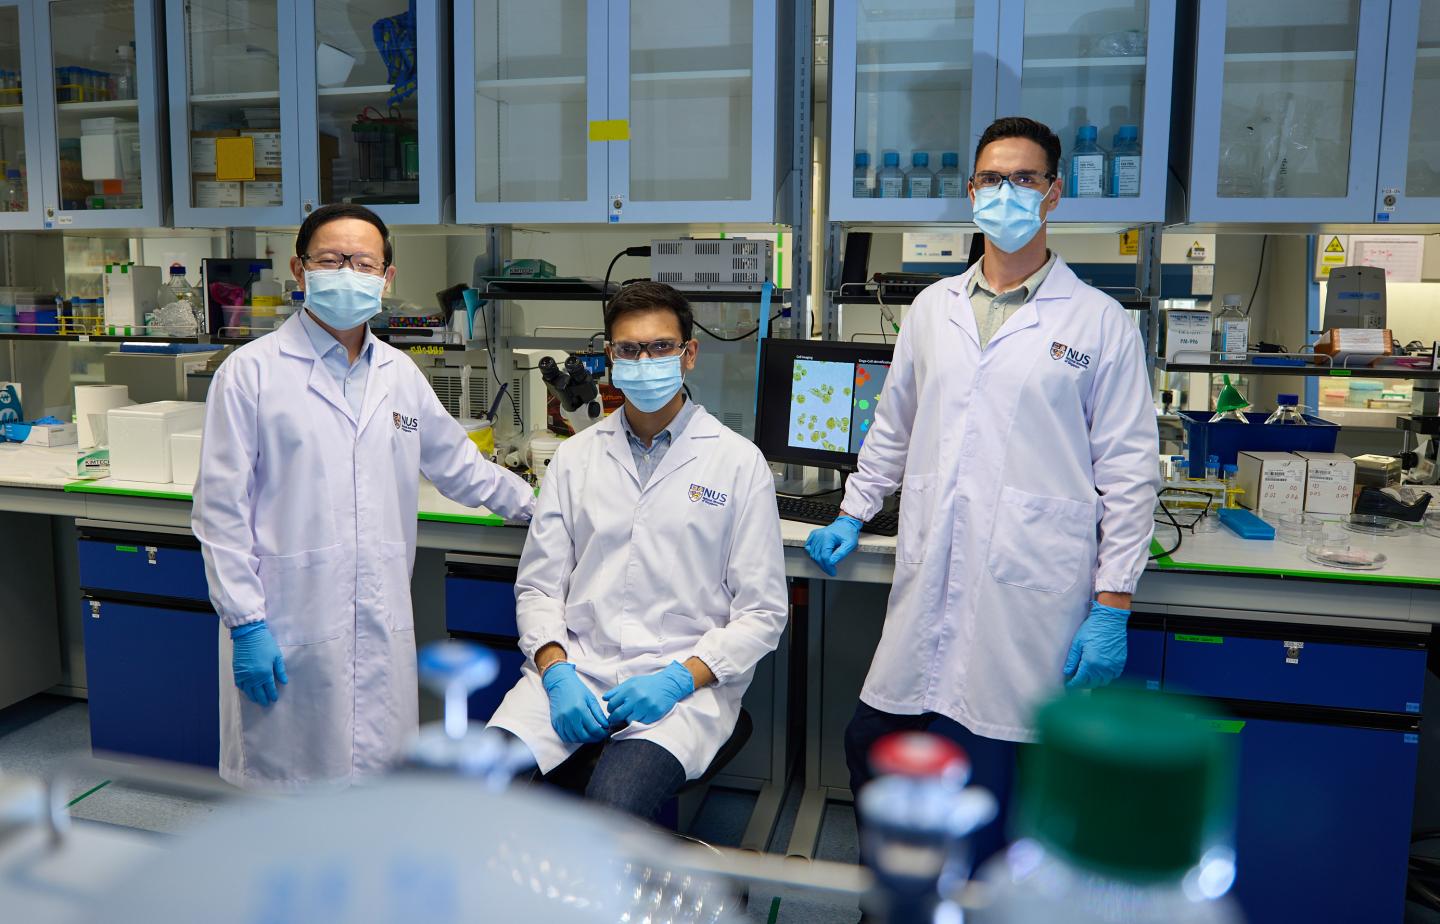 Photo 1: NUS researchers harness AI to identify cancer cells by their acidity